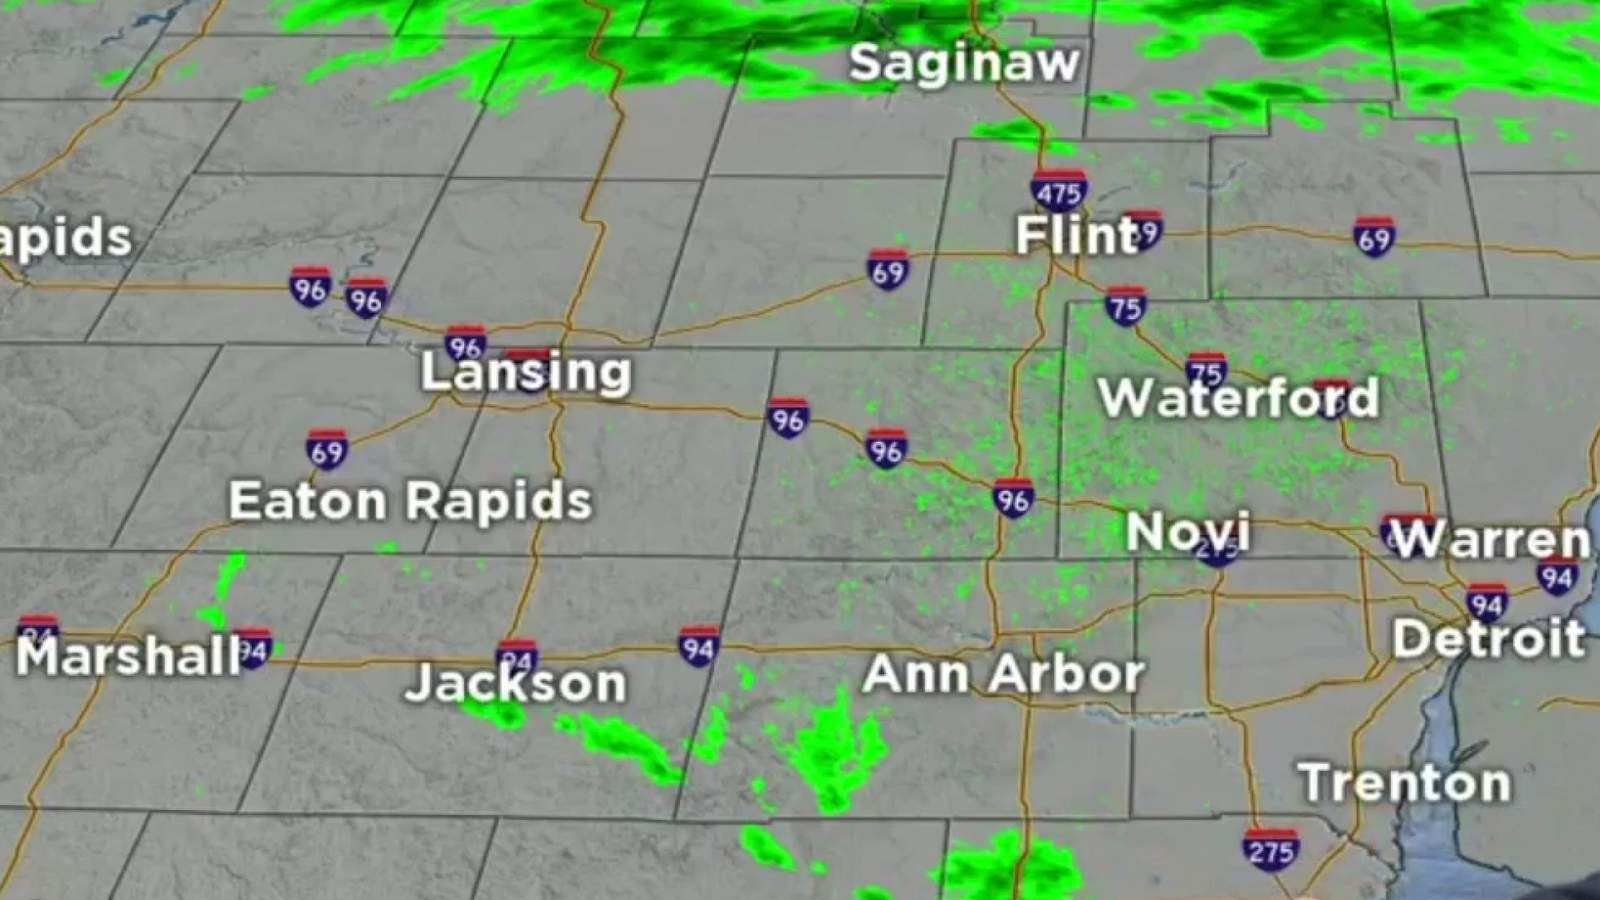 Metro Detroit weather: Cloudy, wet and chilly Sunday